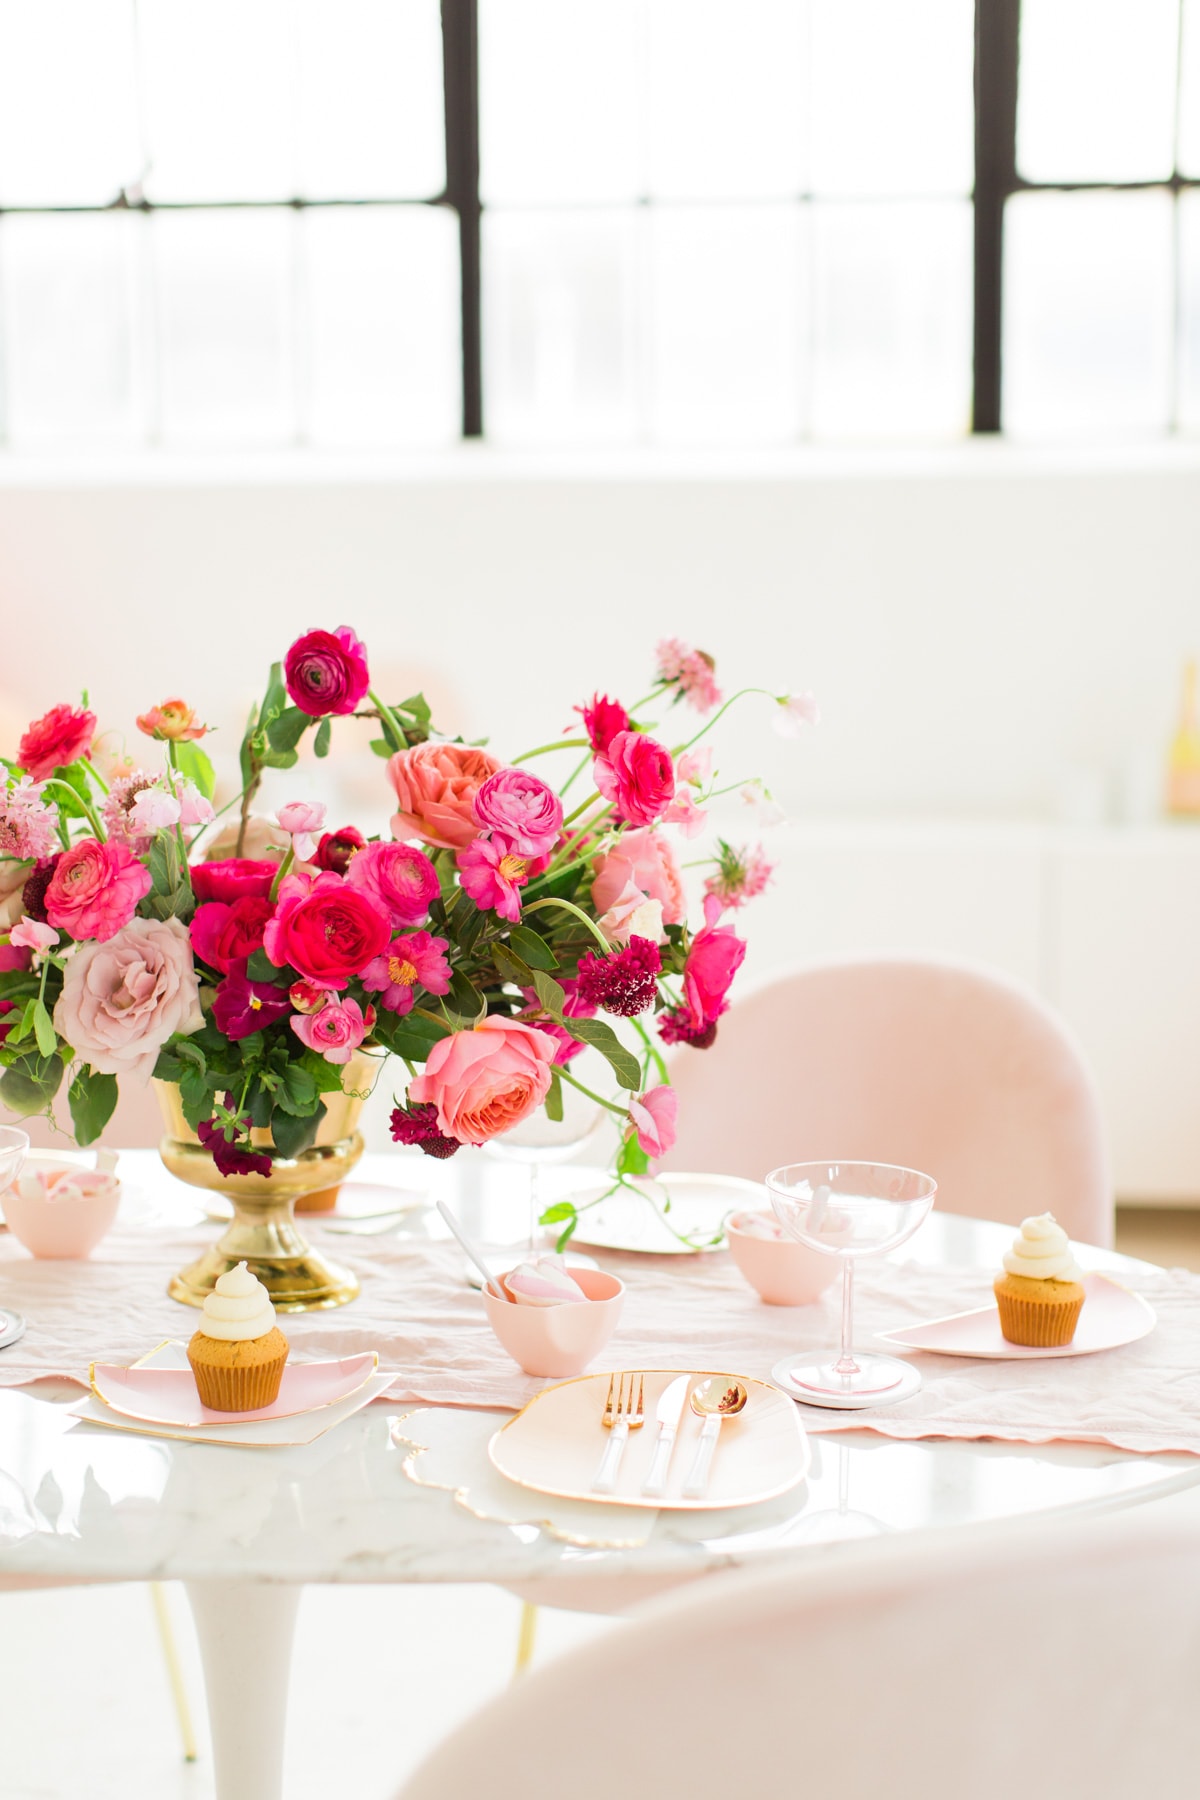 A Simple and Chic Galentine's Table by top Houston lifestyle blogger Ashley Rose of Sugar and Cloth